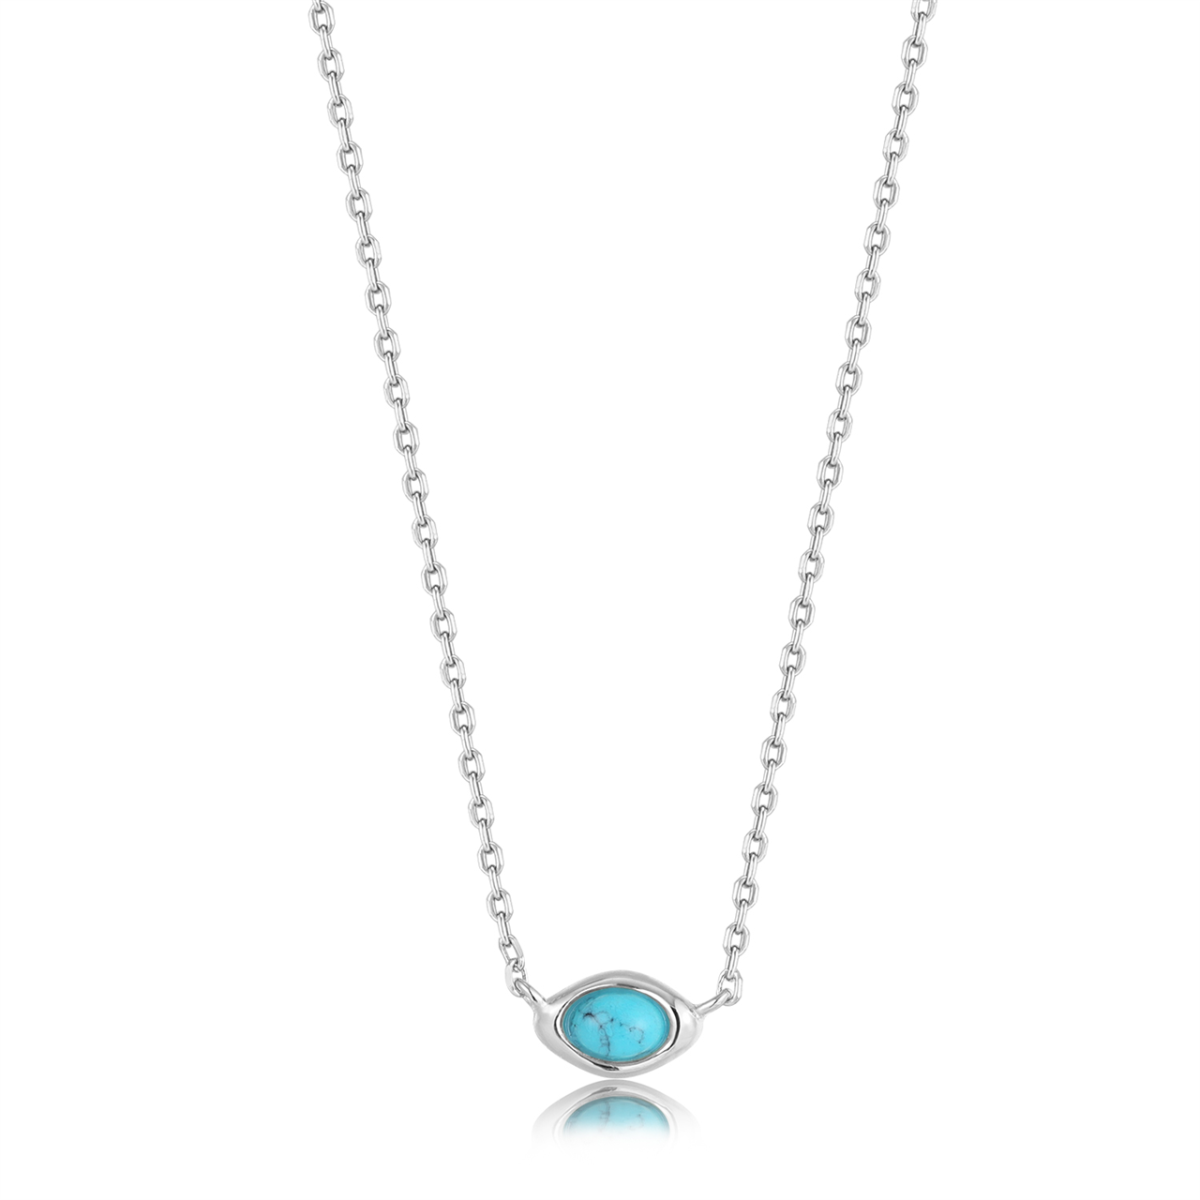 Ania Haie Sterling Silver Turquoise Necklace